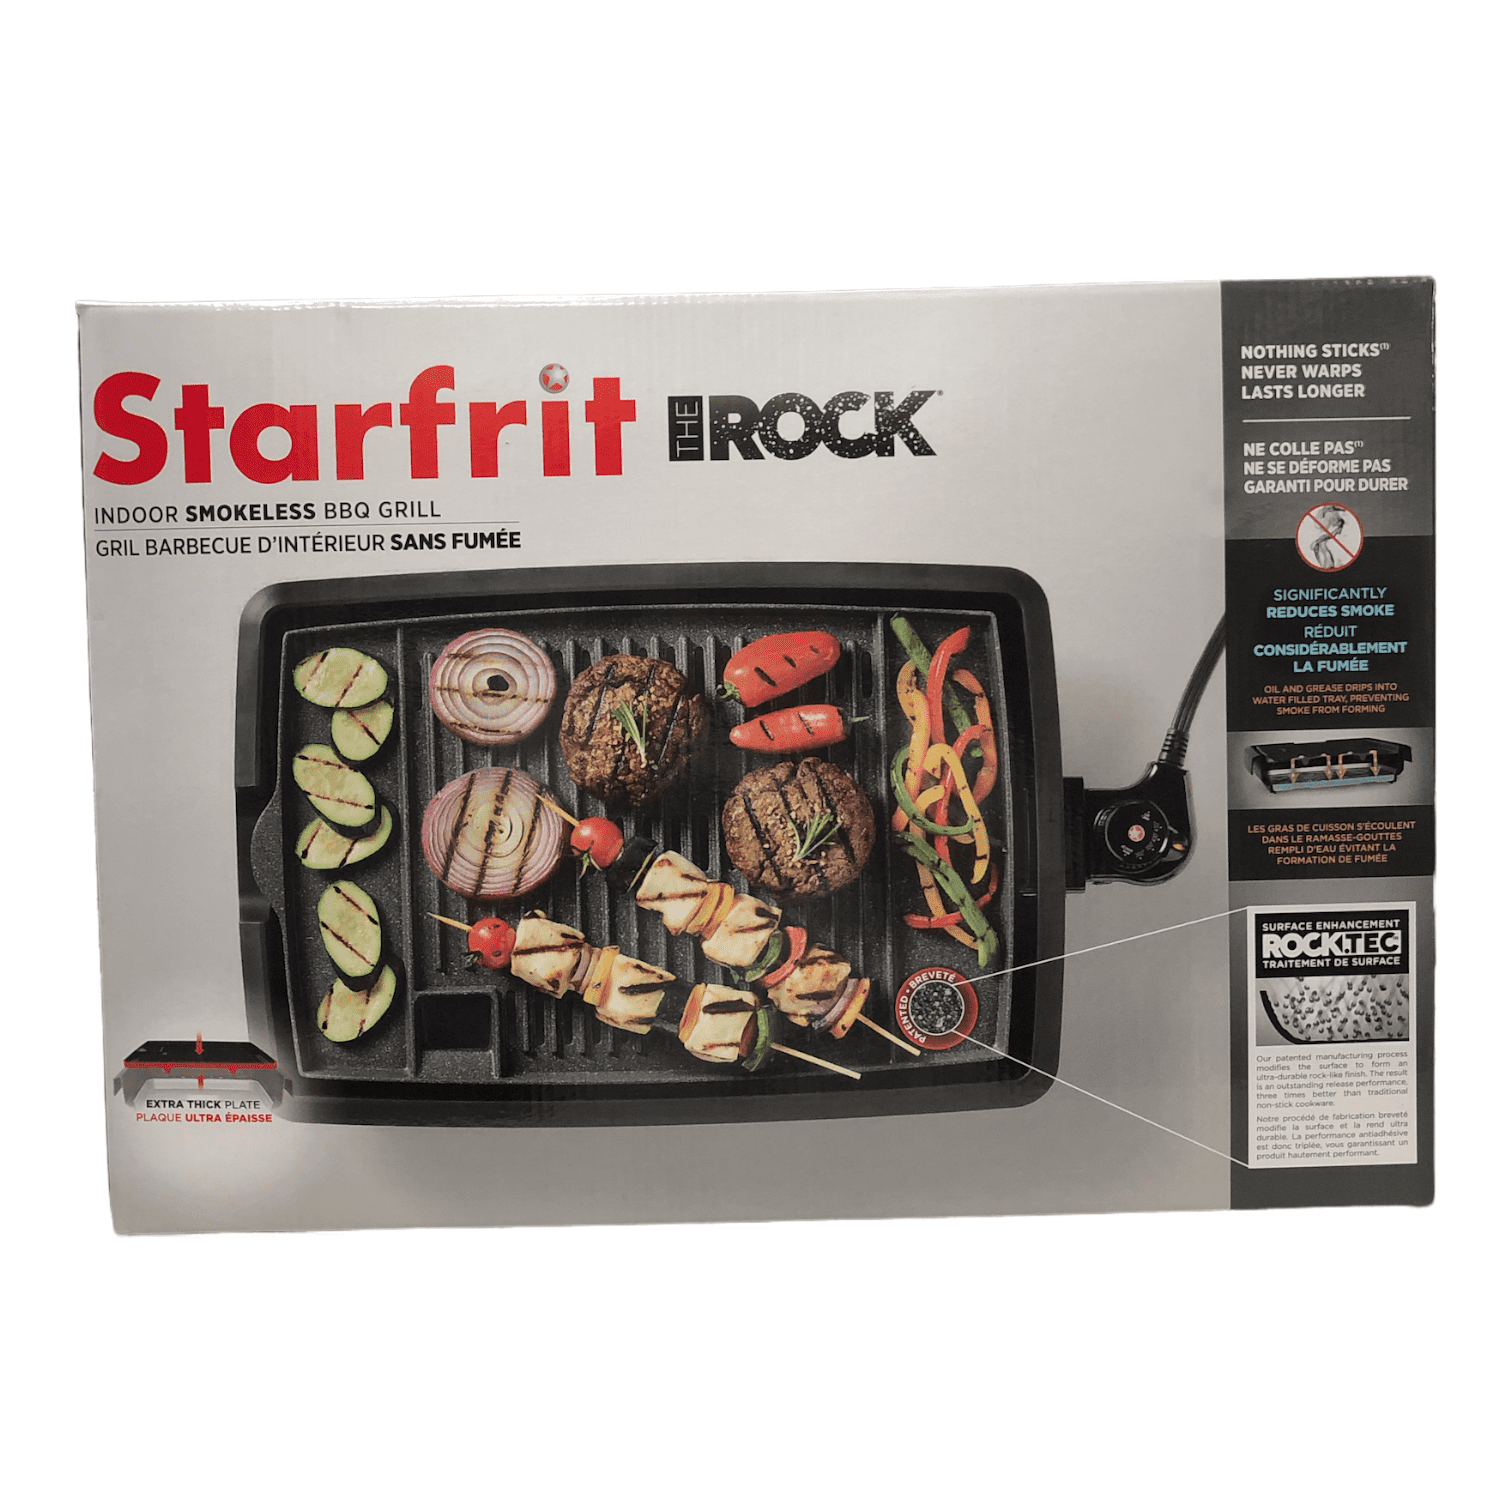 Governable Figur Footpad The Rock By Starfrit Indoor Smokeless Electric BBQ Grill - Walmart.com